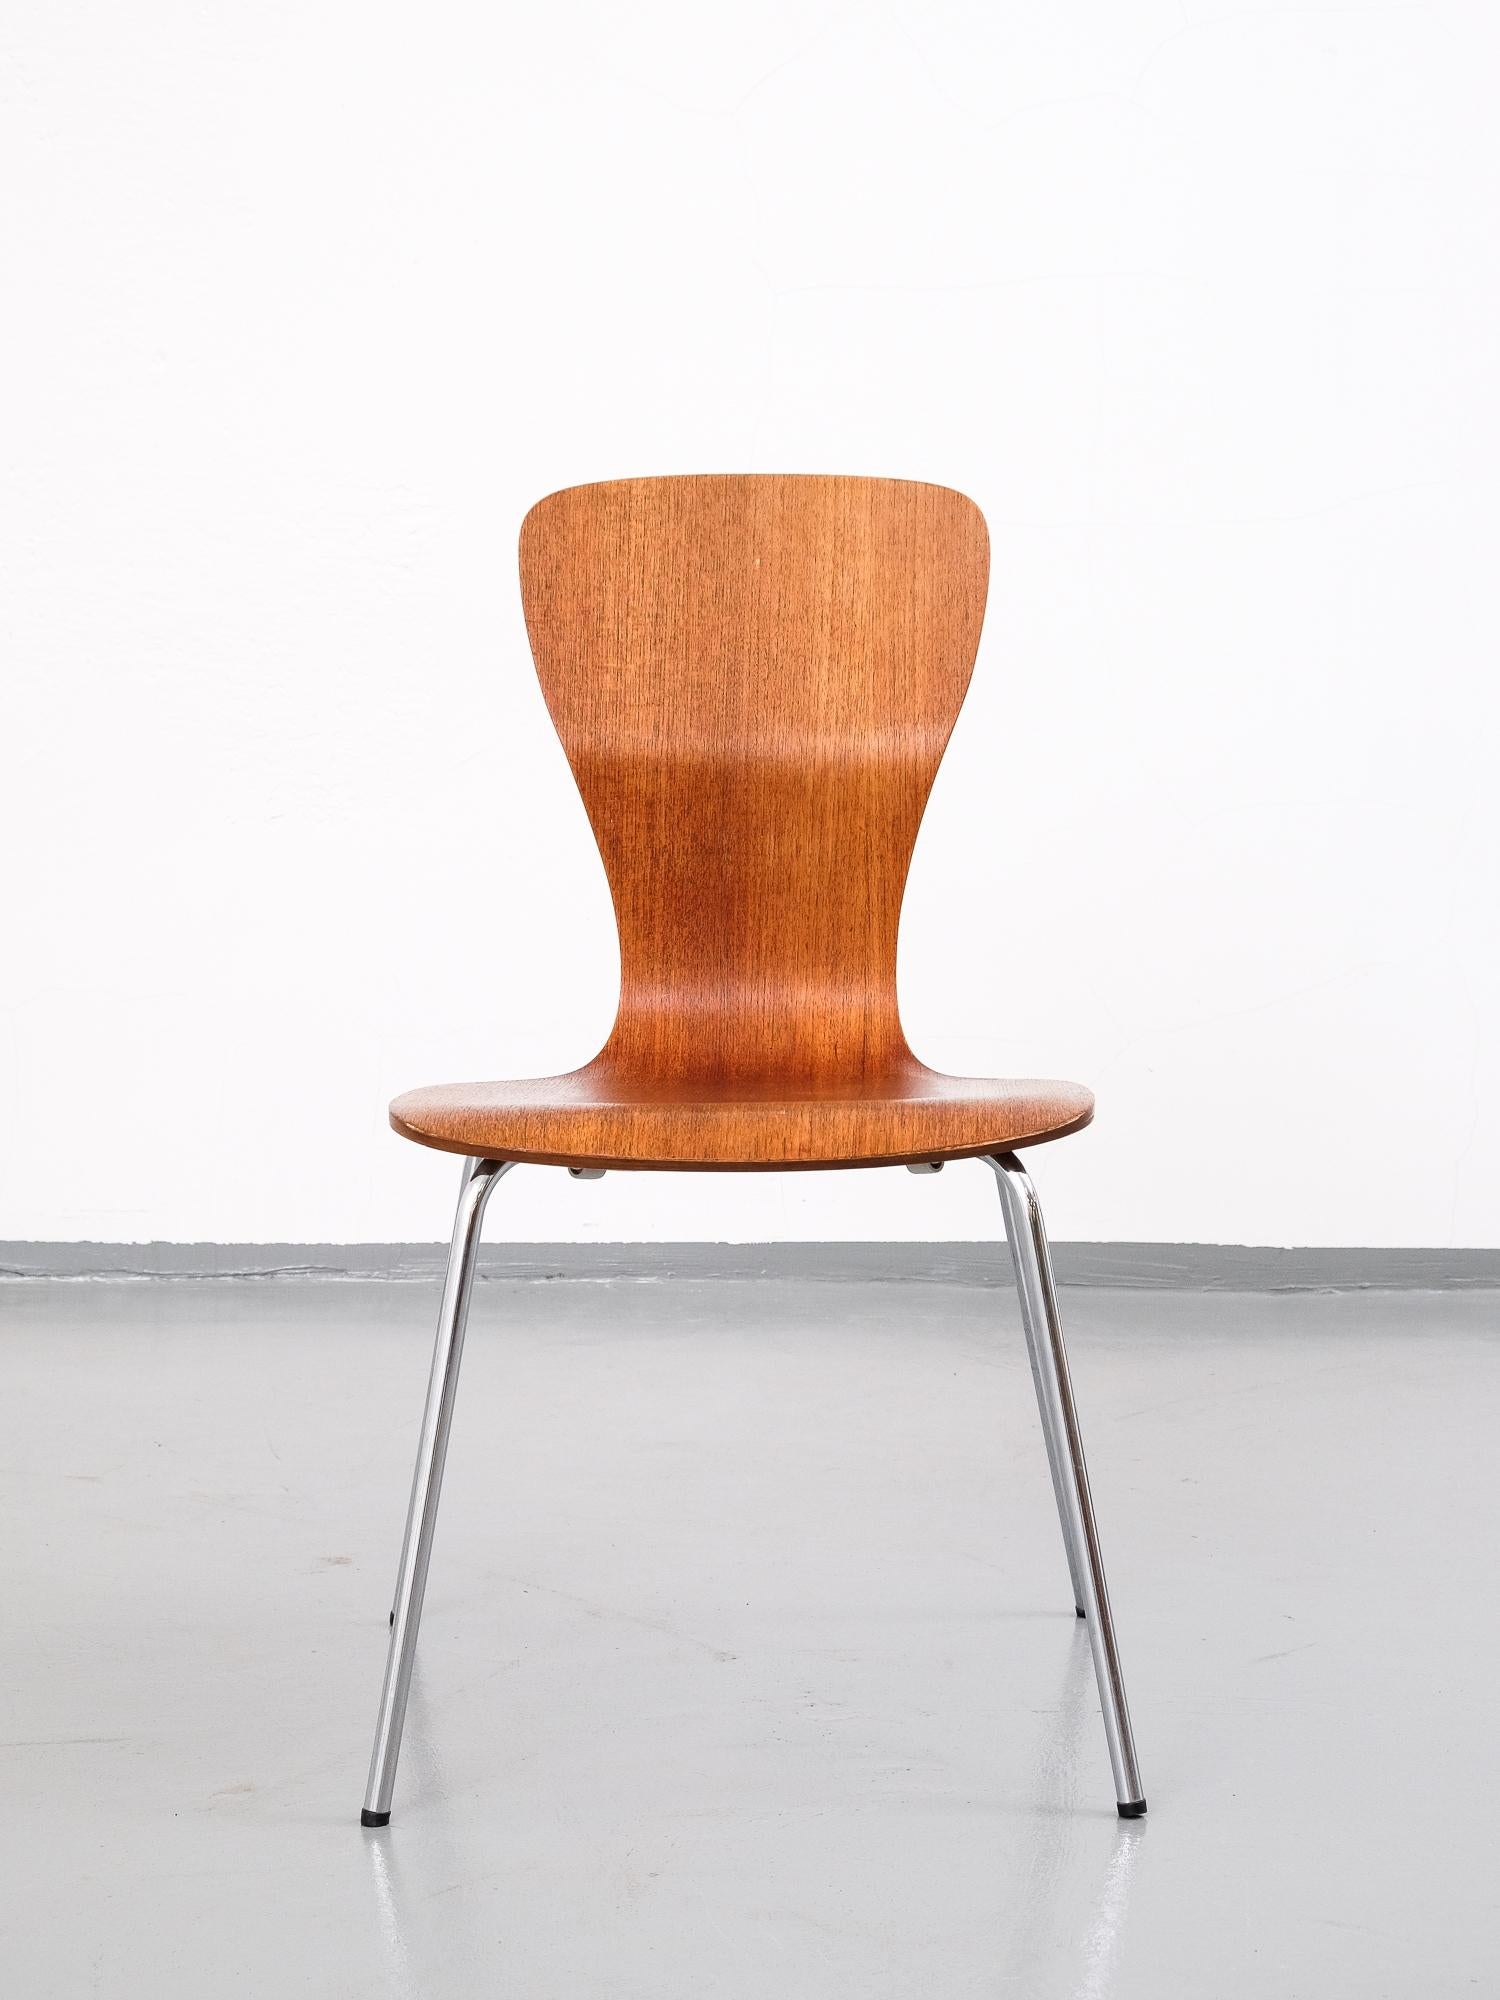 'Nikke' chairs were designed in 1958 by Tapio Wirkkala for Asko Finland. Teak veneer seat, chrome base. Stamped and labelled.